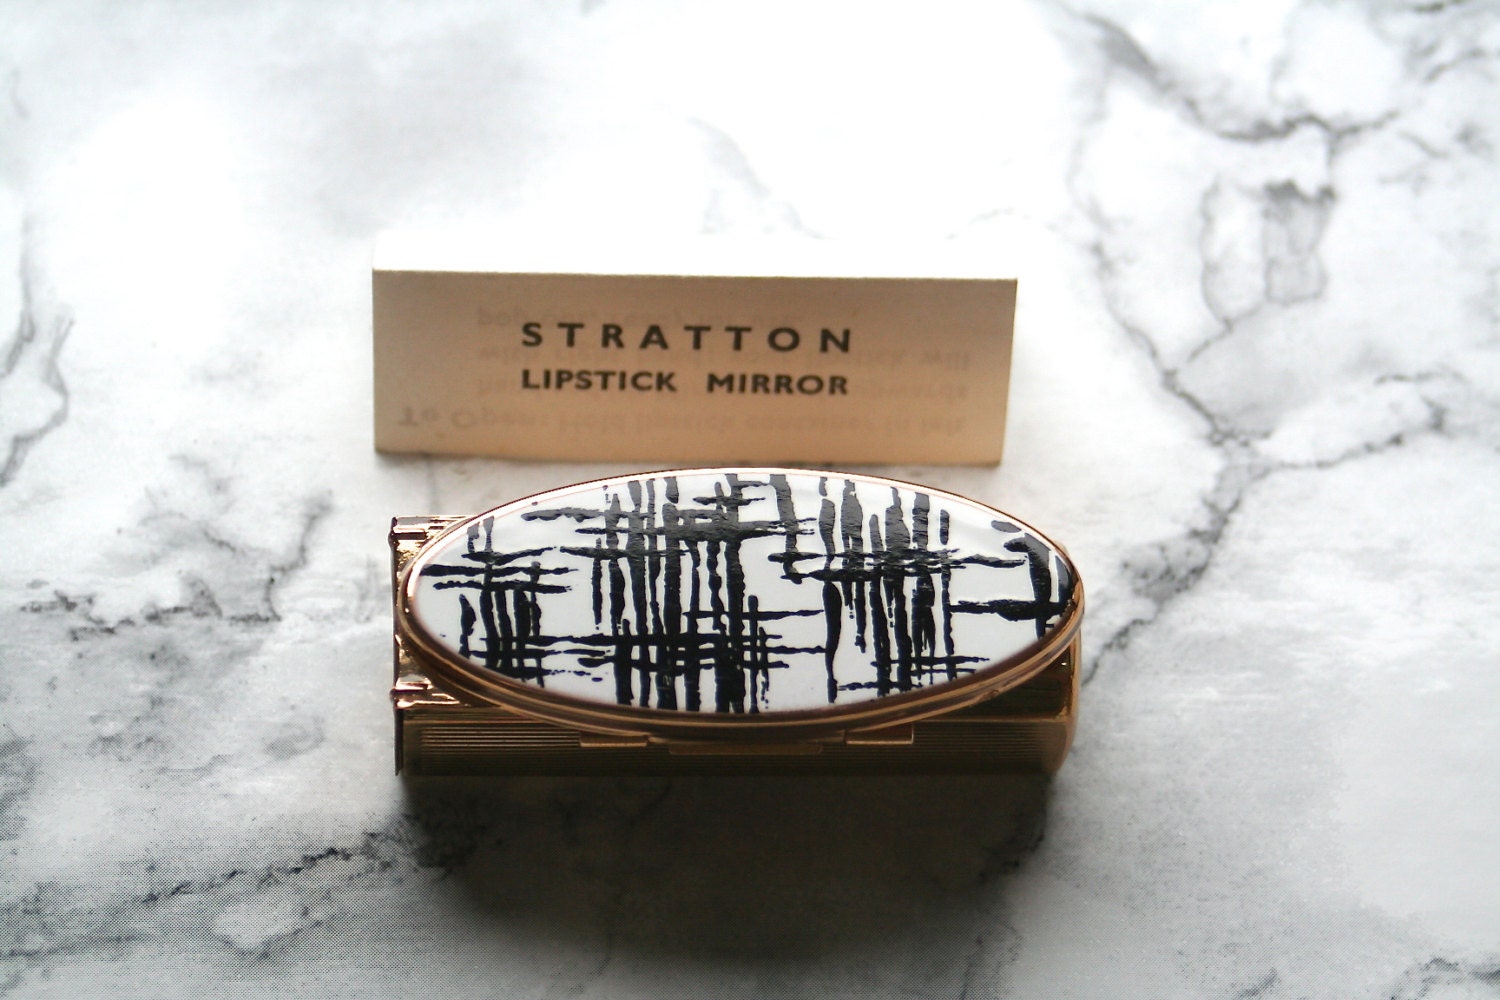 FREE SHIPPING WORLDWIDE Stratton of London Black and White Lipstick Holder with Mirror - thevintagemart